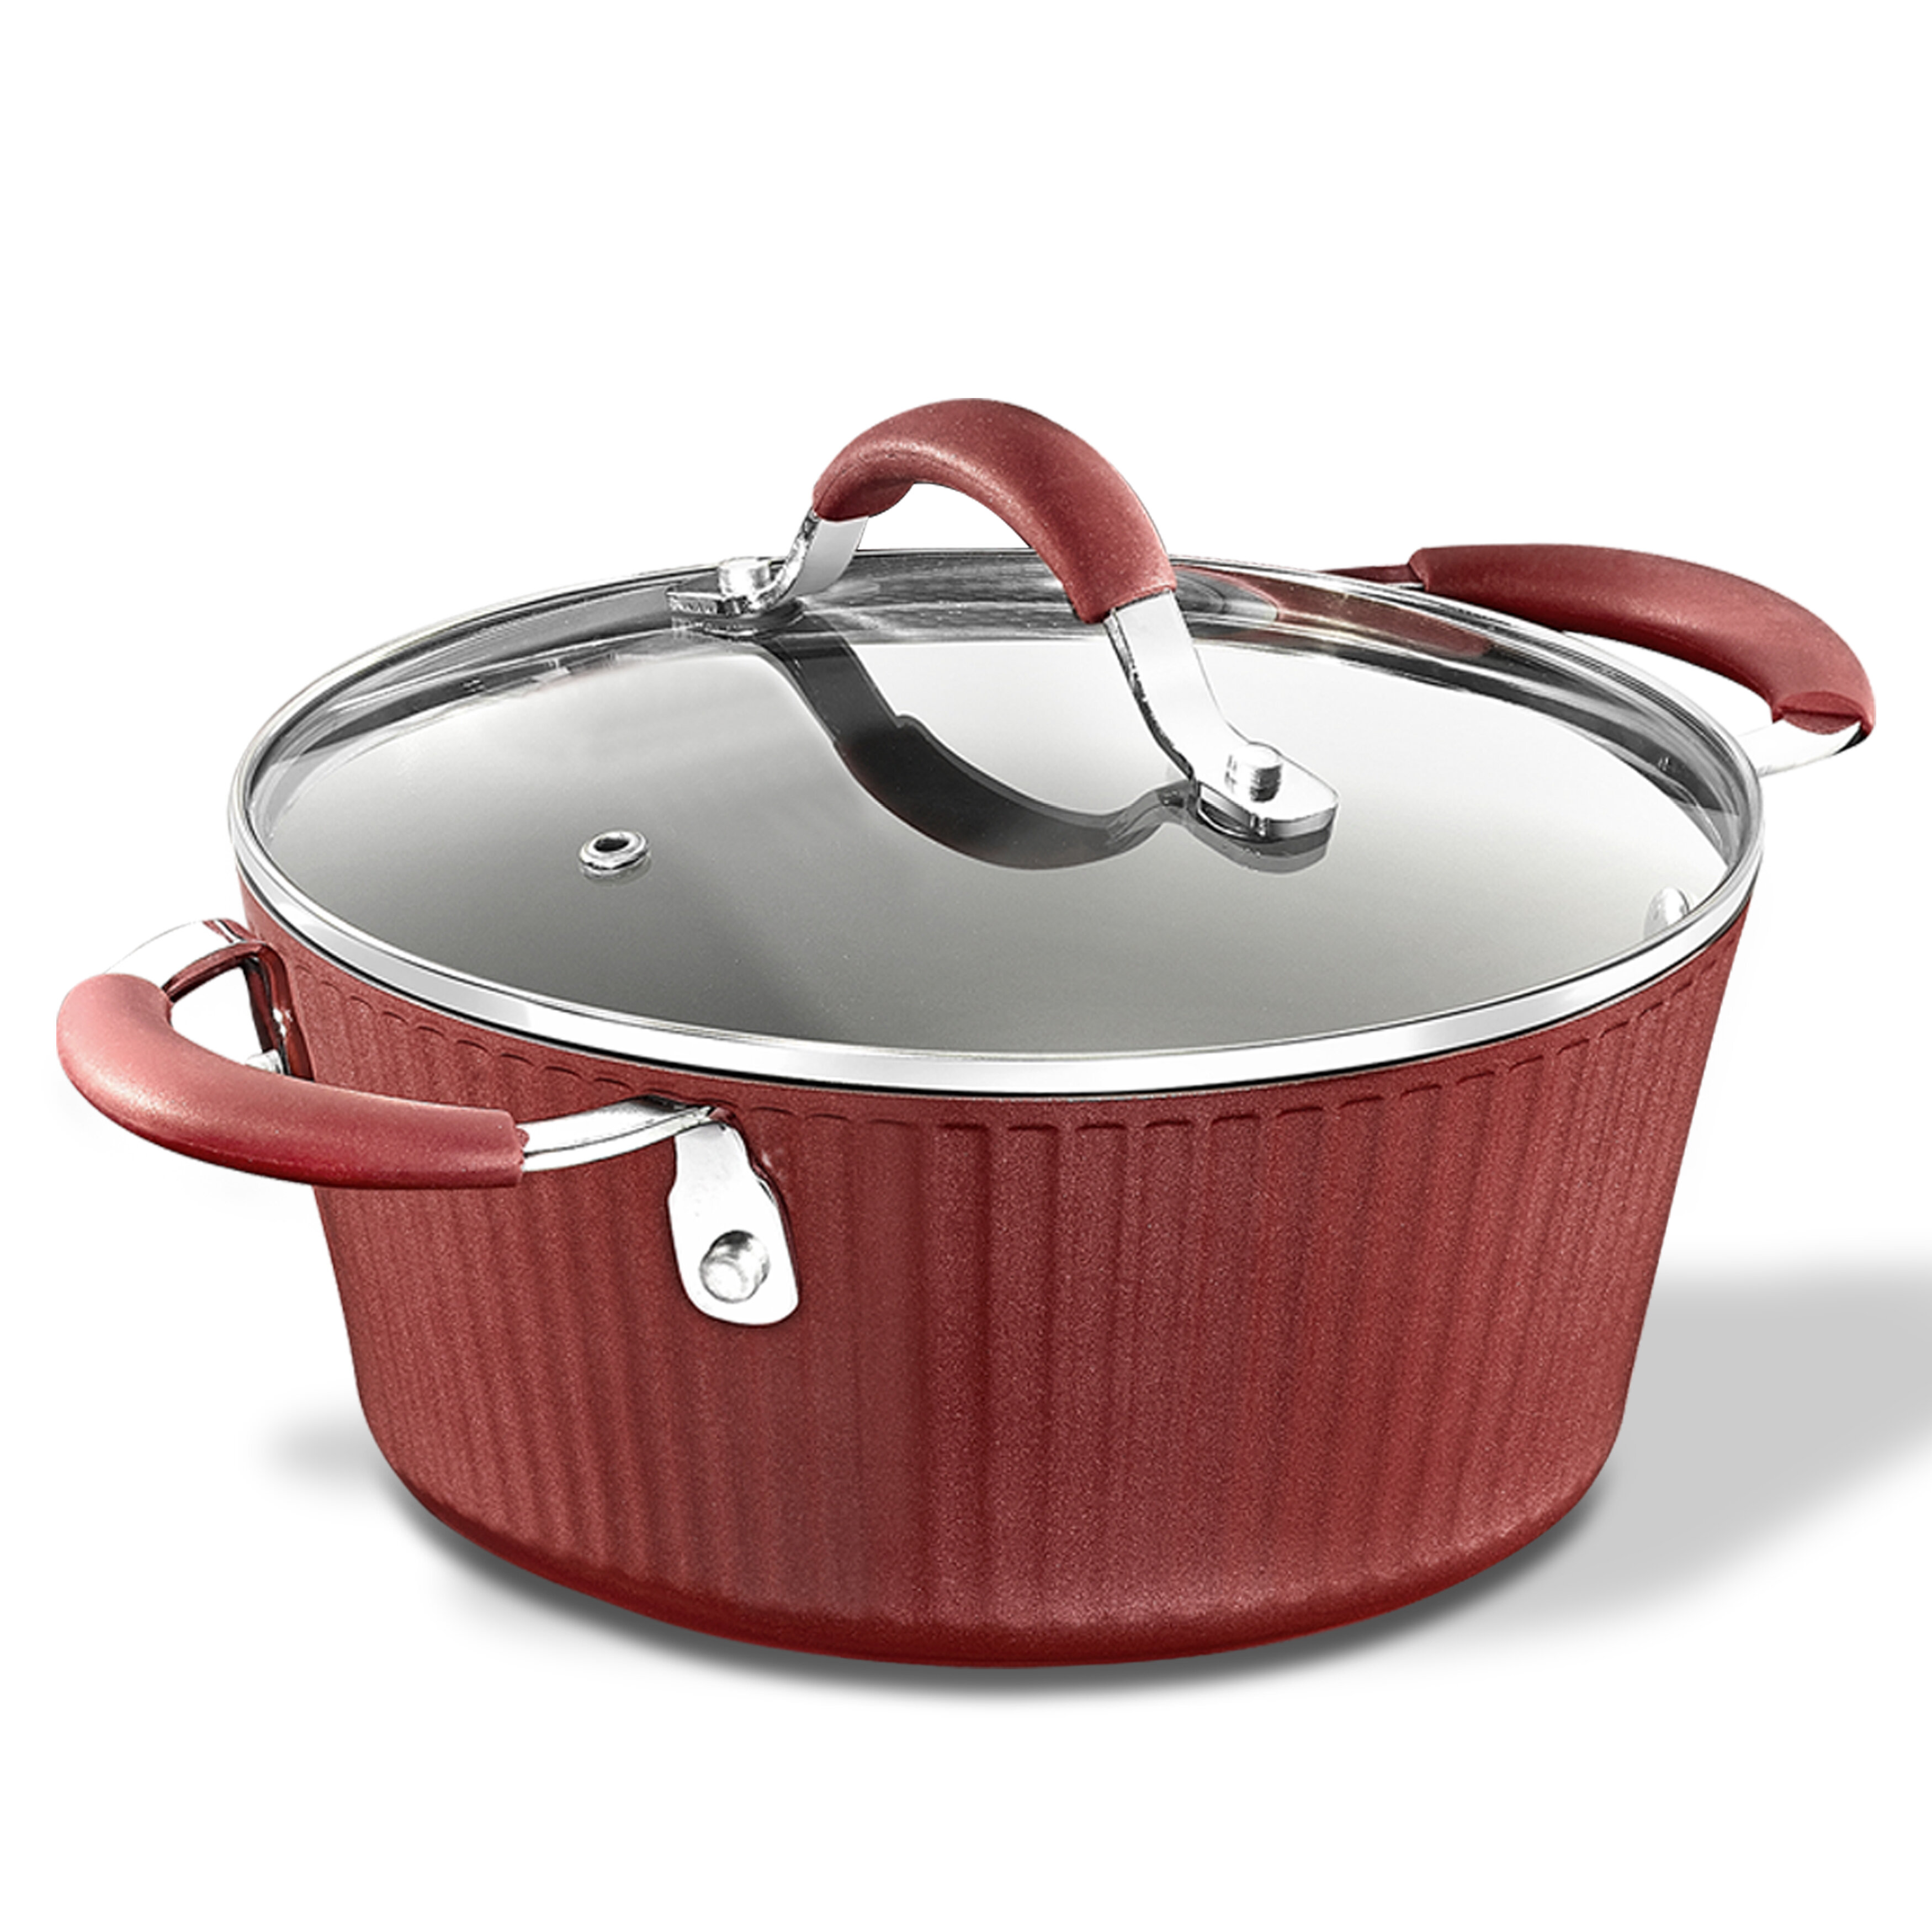 IMUSA IMUSA Dutch Oven with Glass Lid and Soft Touch Handle 4.9 Quart, Red  - IMUSA